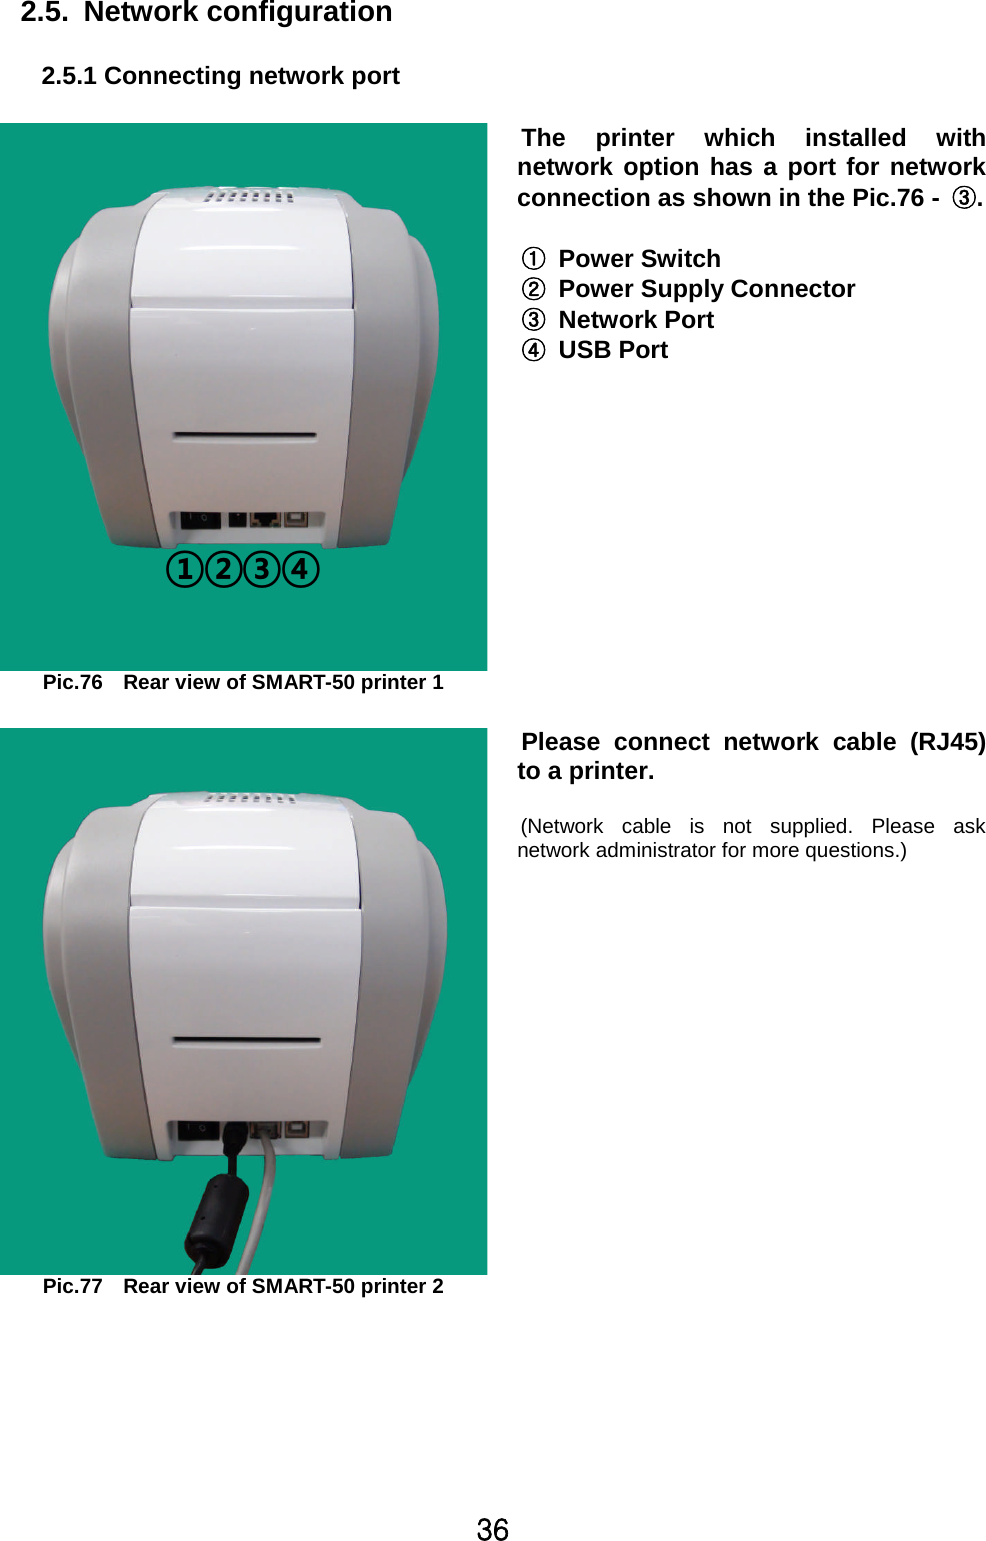 Z]2.5. Network configuration2.5.1 Connecting network portPic.76 Rear view of SMART-50 printer 1The printer which installed withnetwork option has a port for networkconnection as shown in the Pic.76 - ྛ.ྙPower SwitchྚPower Supply ConnectorྛNetwork PortྜUSB PortPic.77 Rear view of SMART-50 printer 2Please connect networkcable (RJ45)to a printer.(Network cable is not supplied. Please asknetwork administrator for more questions.)¢£¤¥